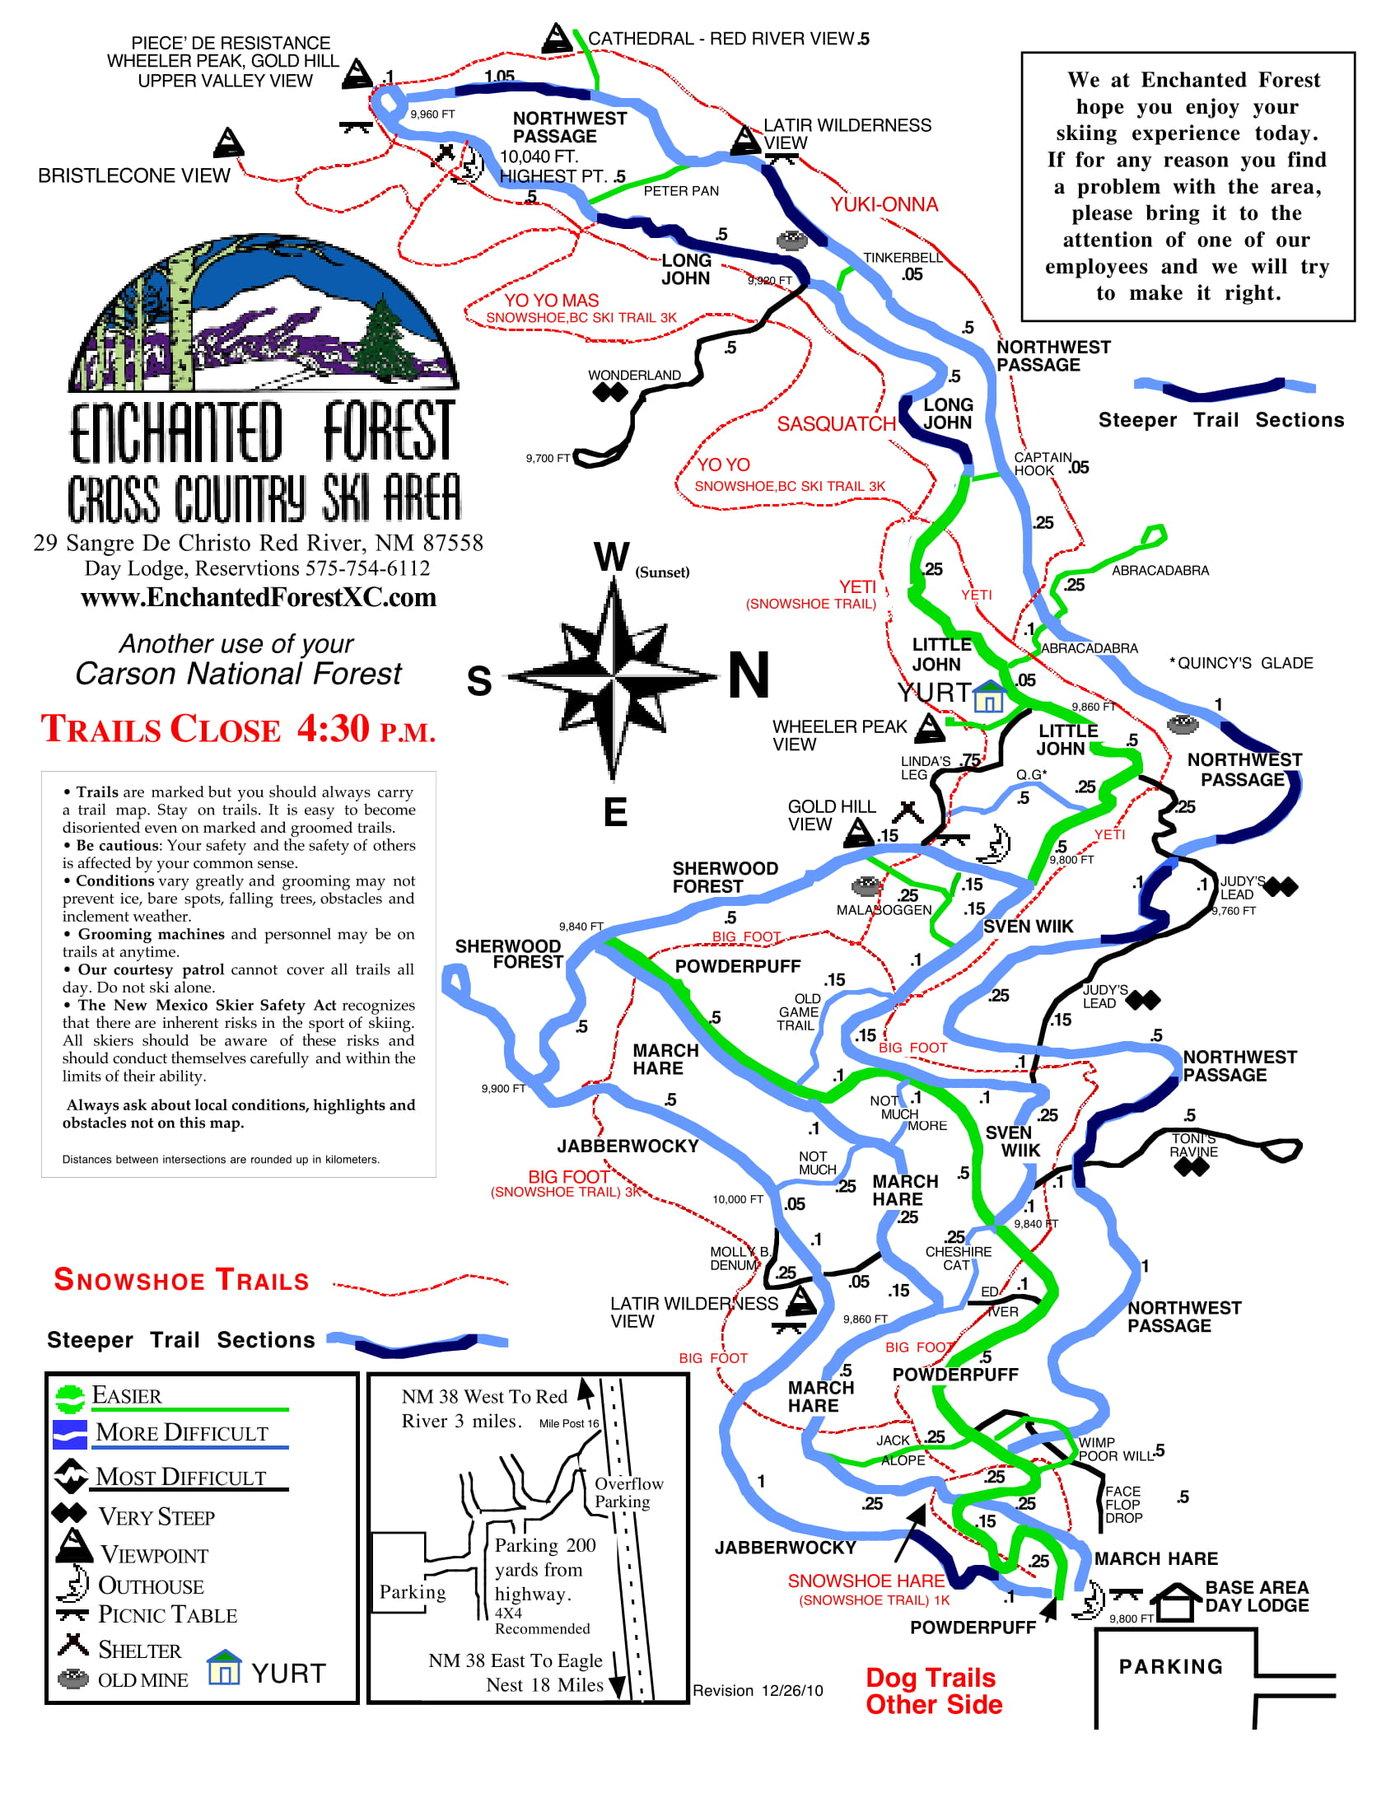 Enchanted Forest Trail Map